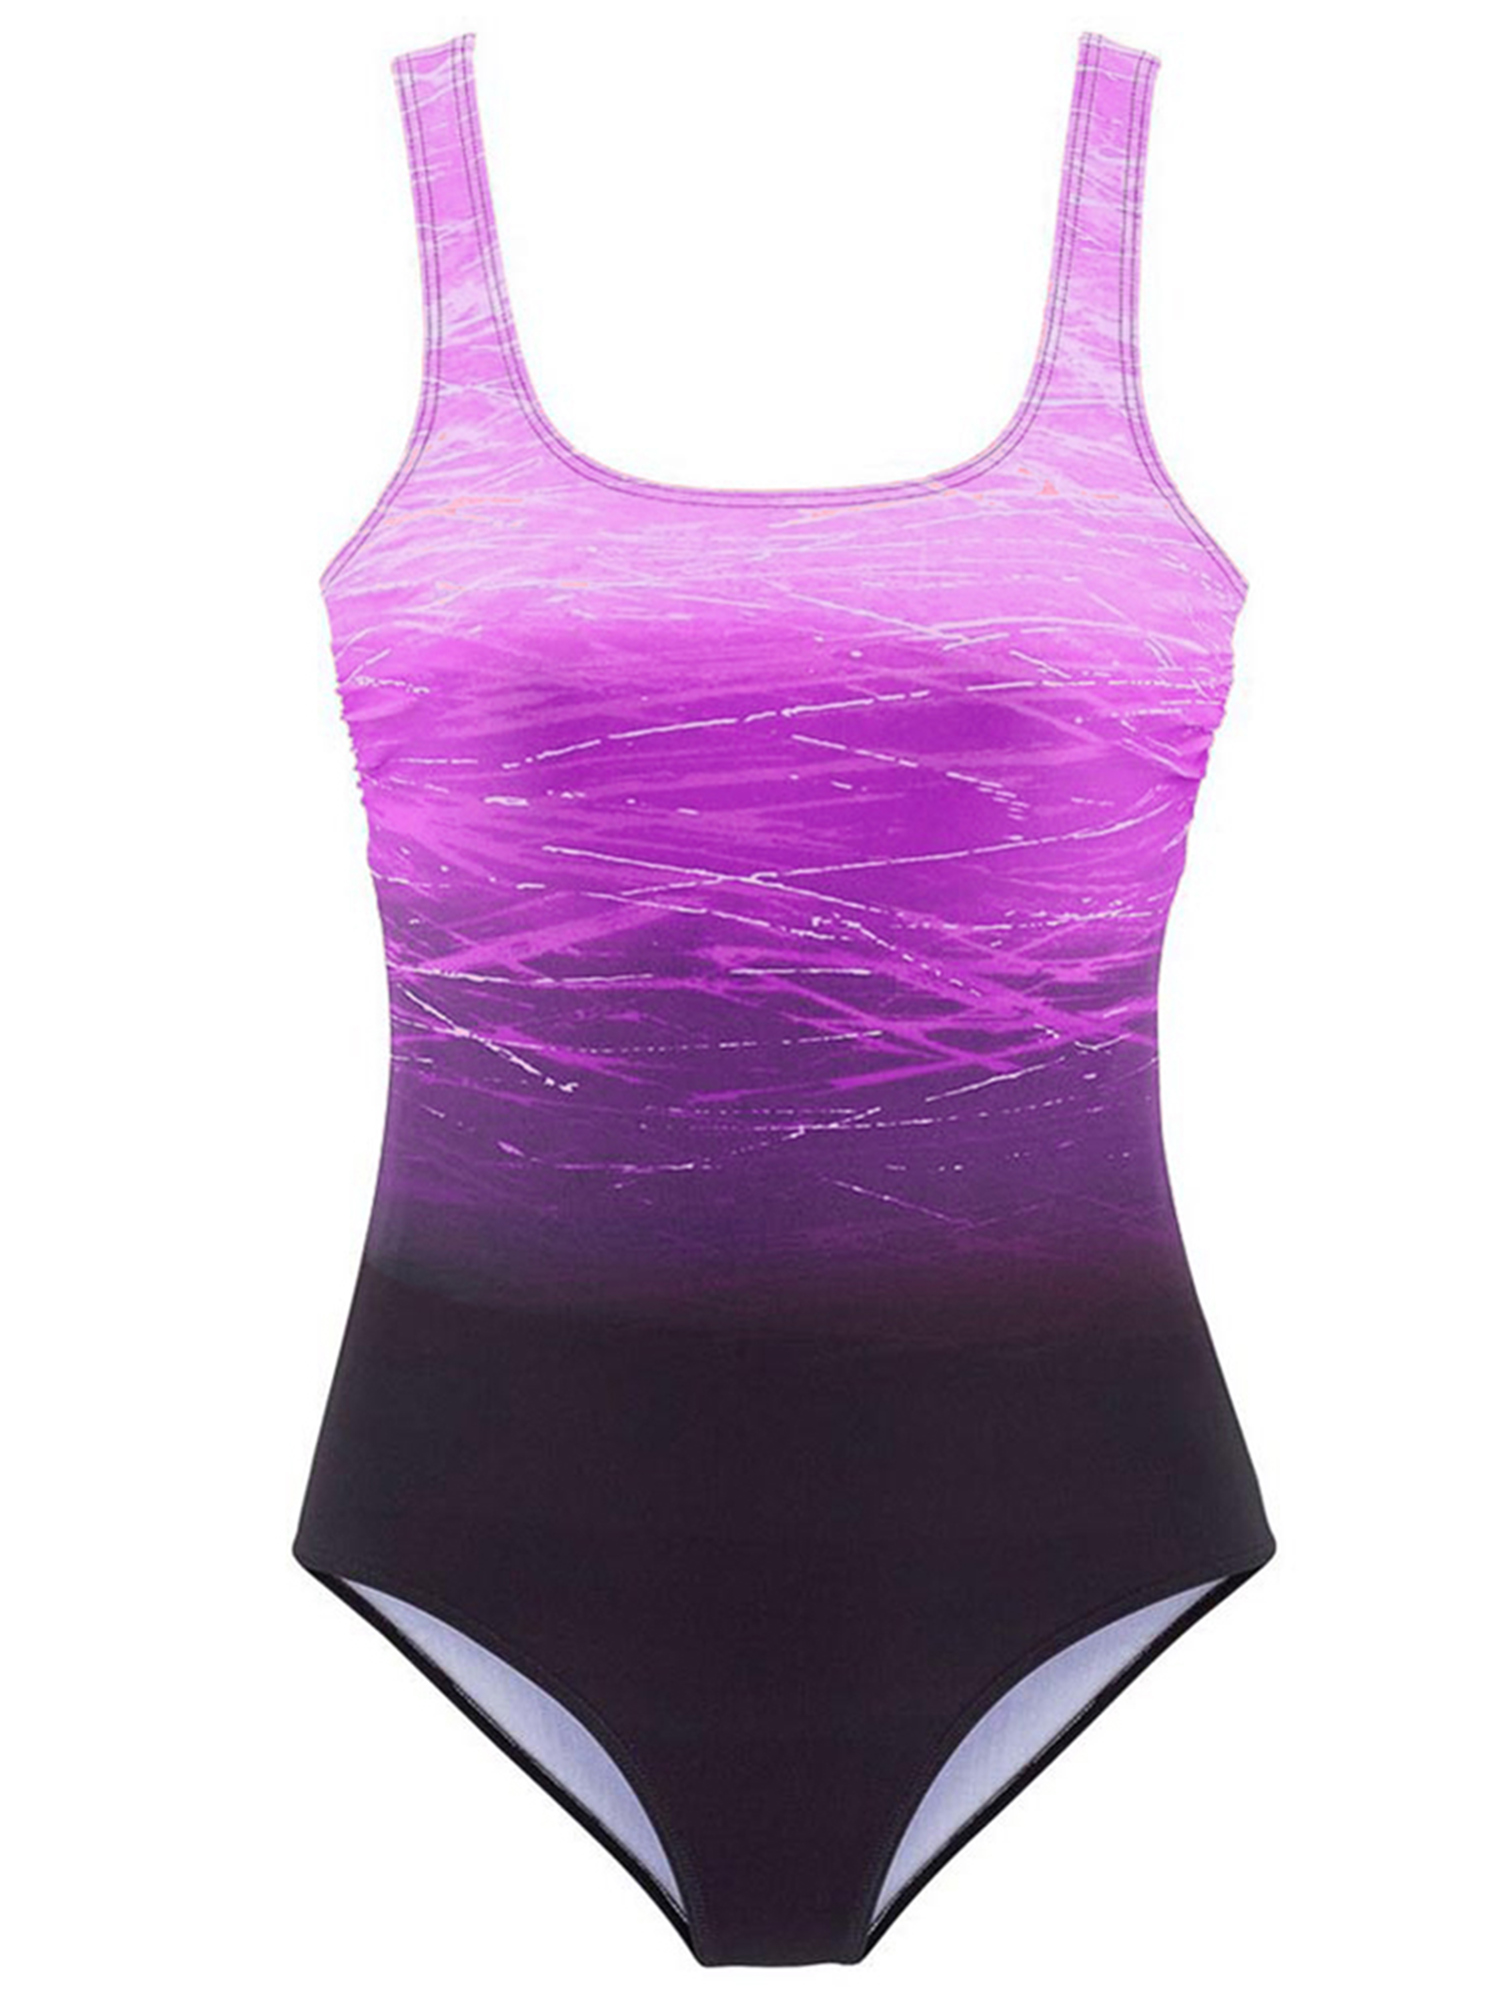 Sexy Dance Women's One Piece Swimsuits Gradient Color Athletic Swimwear Tummy Control Monokini Bathing Suits Size Medium US 4-6 - image 4 of 5